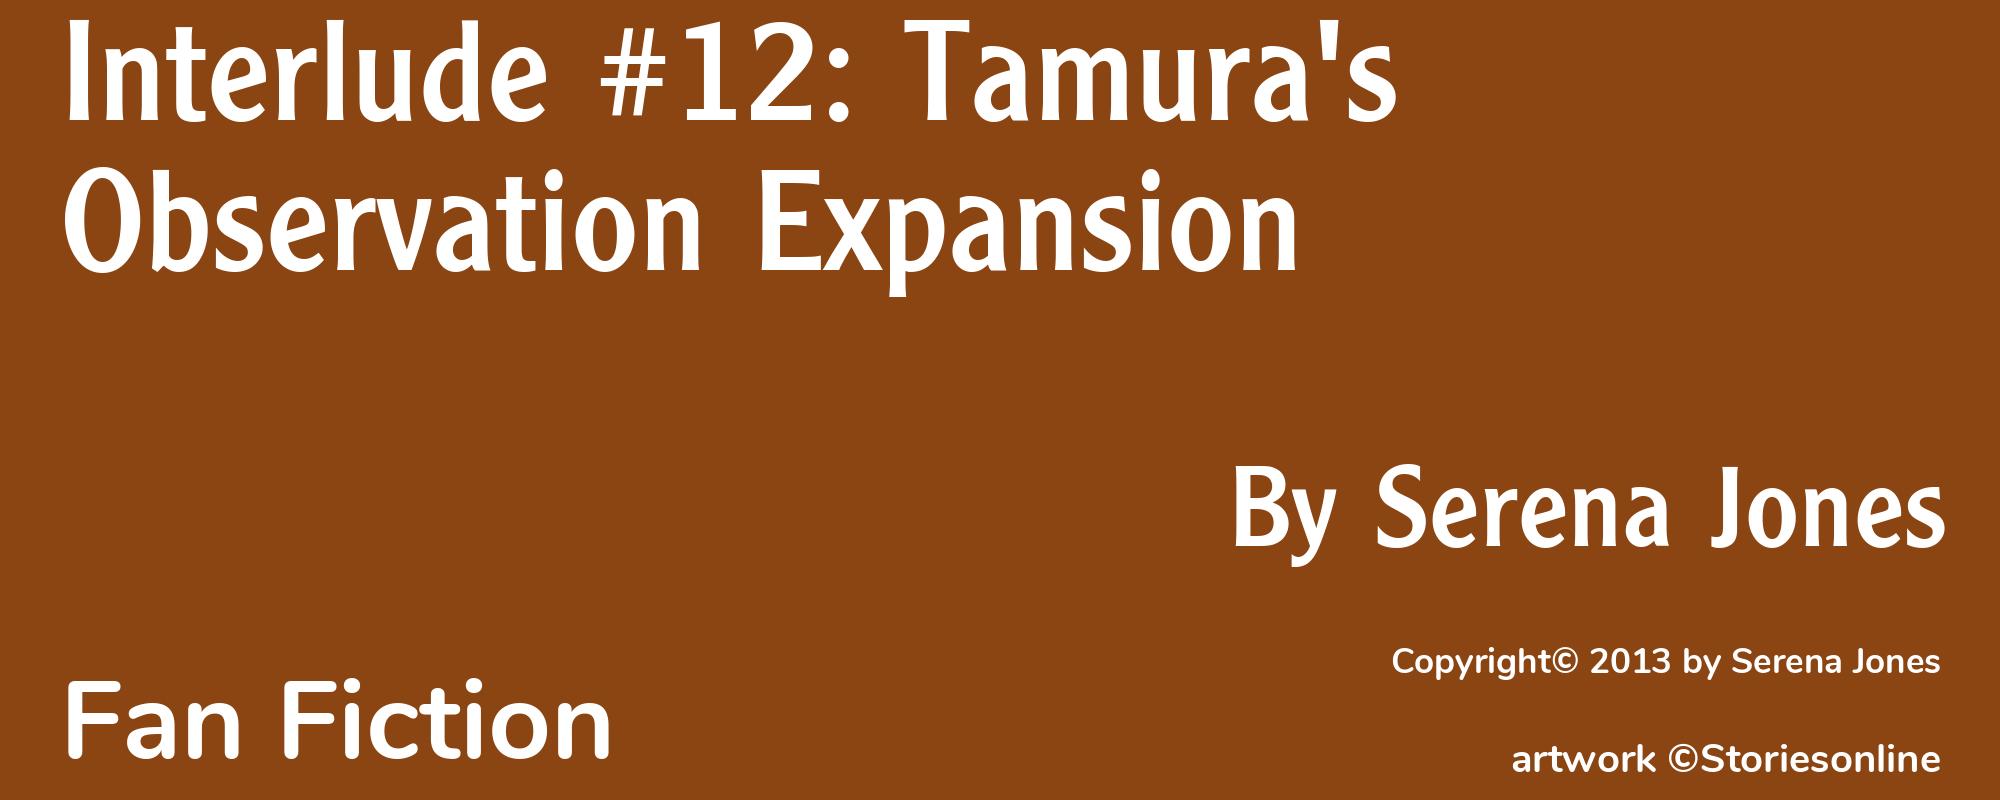 Interlude #12: Tamura's Observation Expansion - Cover